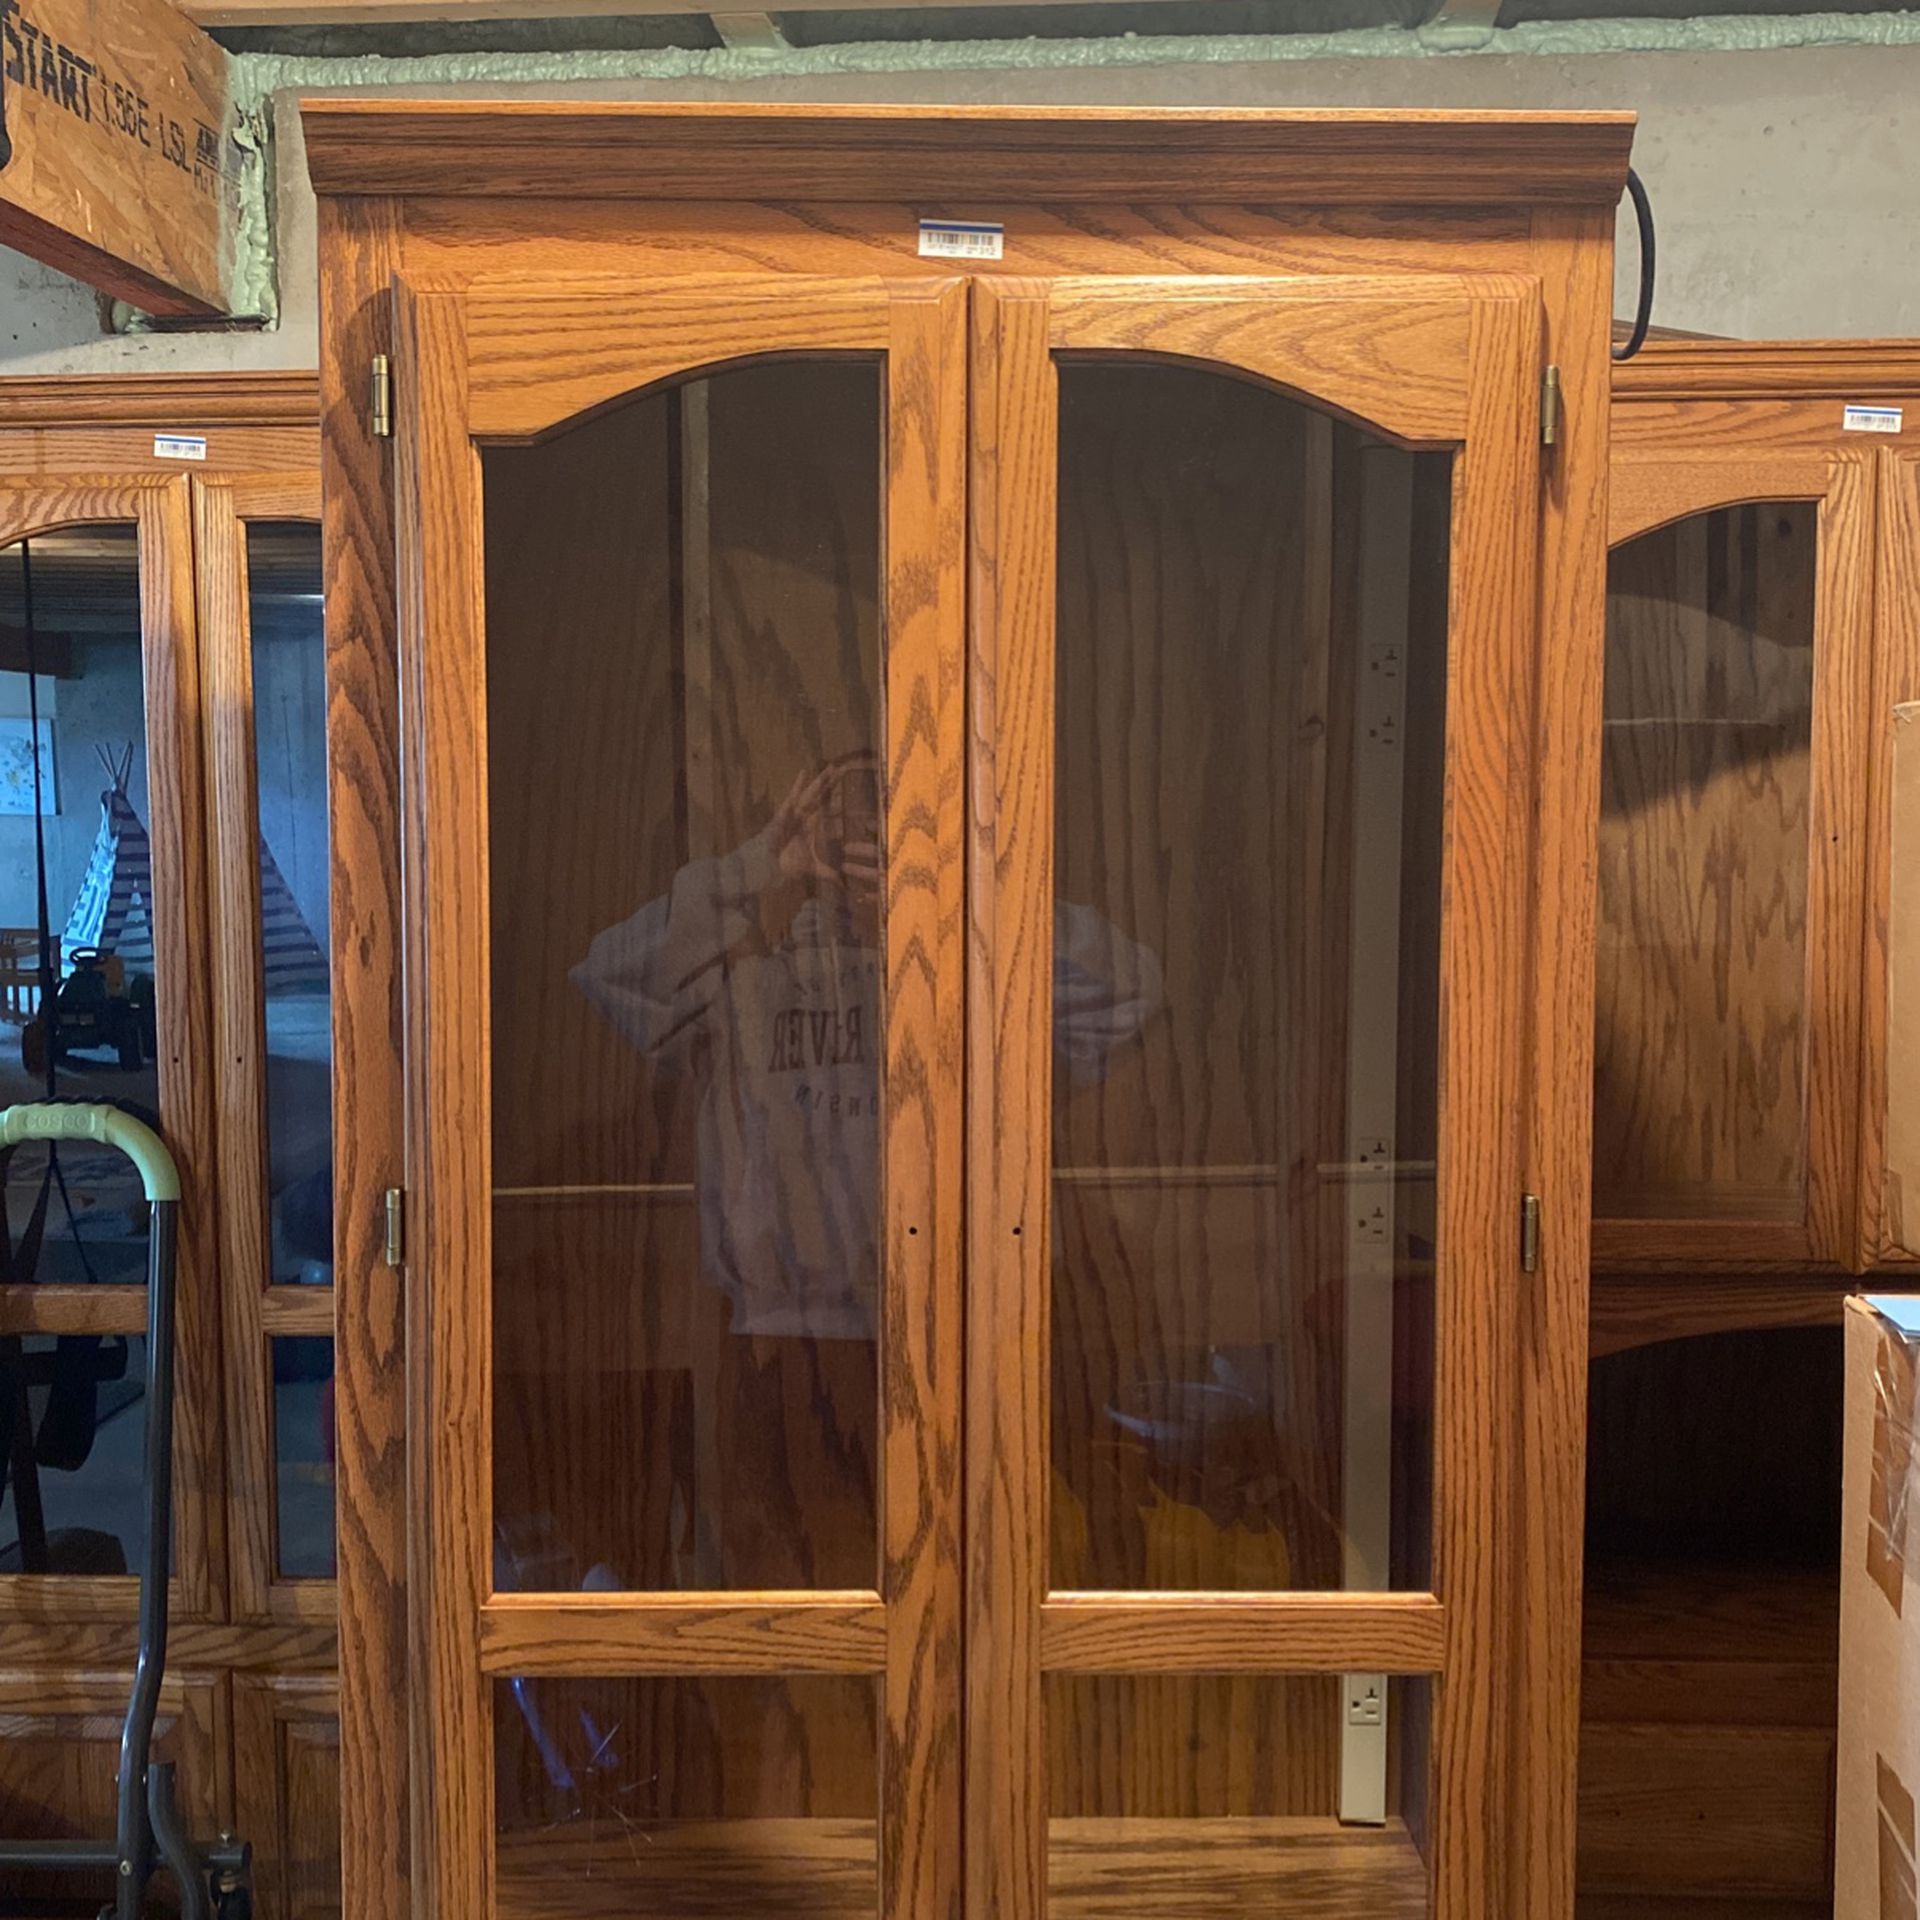 Real Oak Cabinets 9 Pieces Total, Can Be Purchased Individually As Well